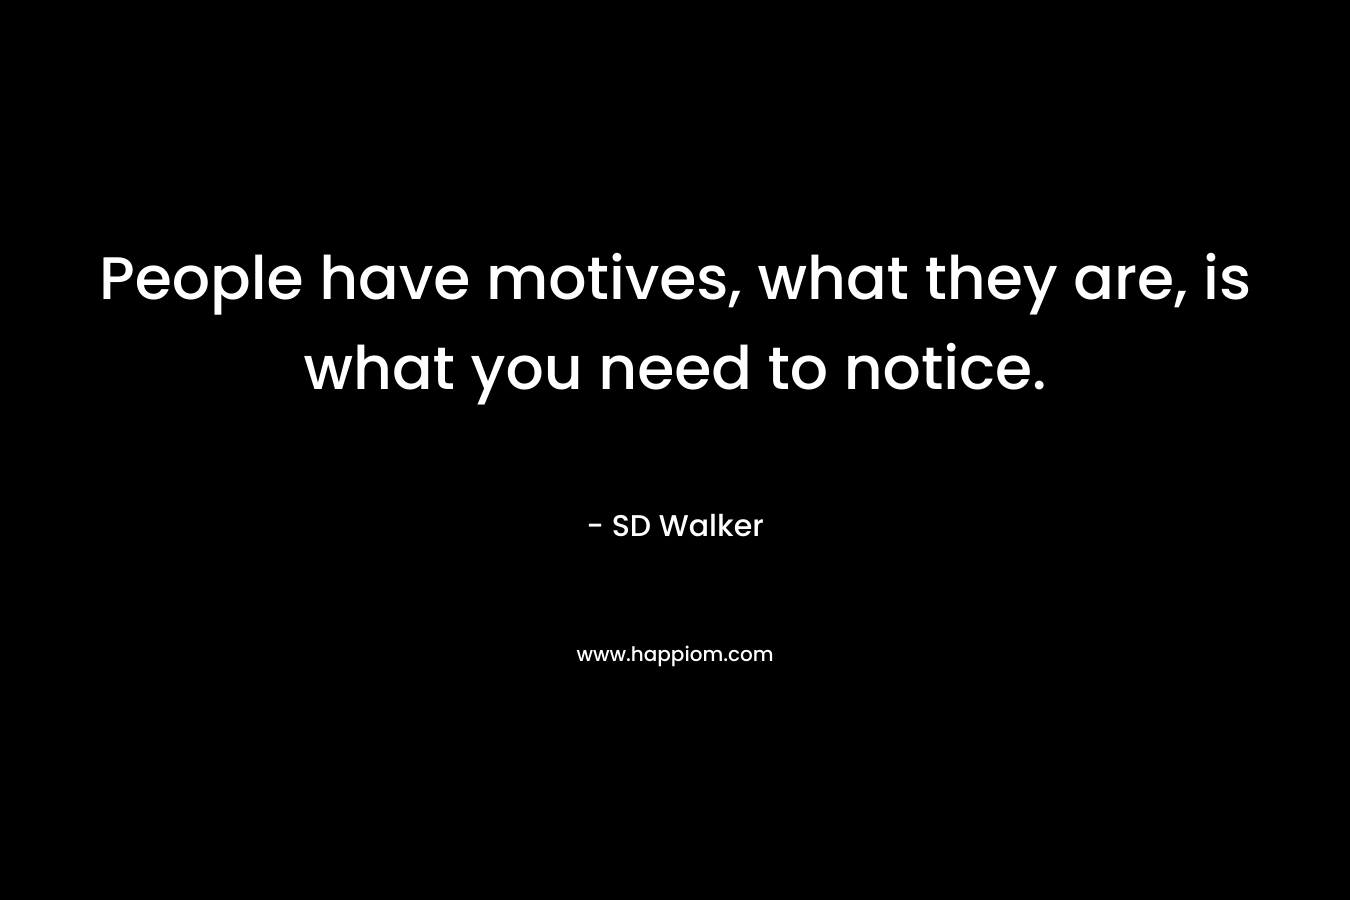 People have motives, what they are, is what you need to notice. – SD Walker